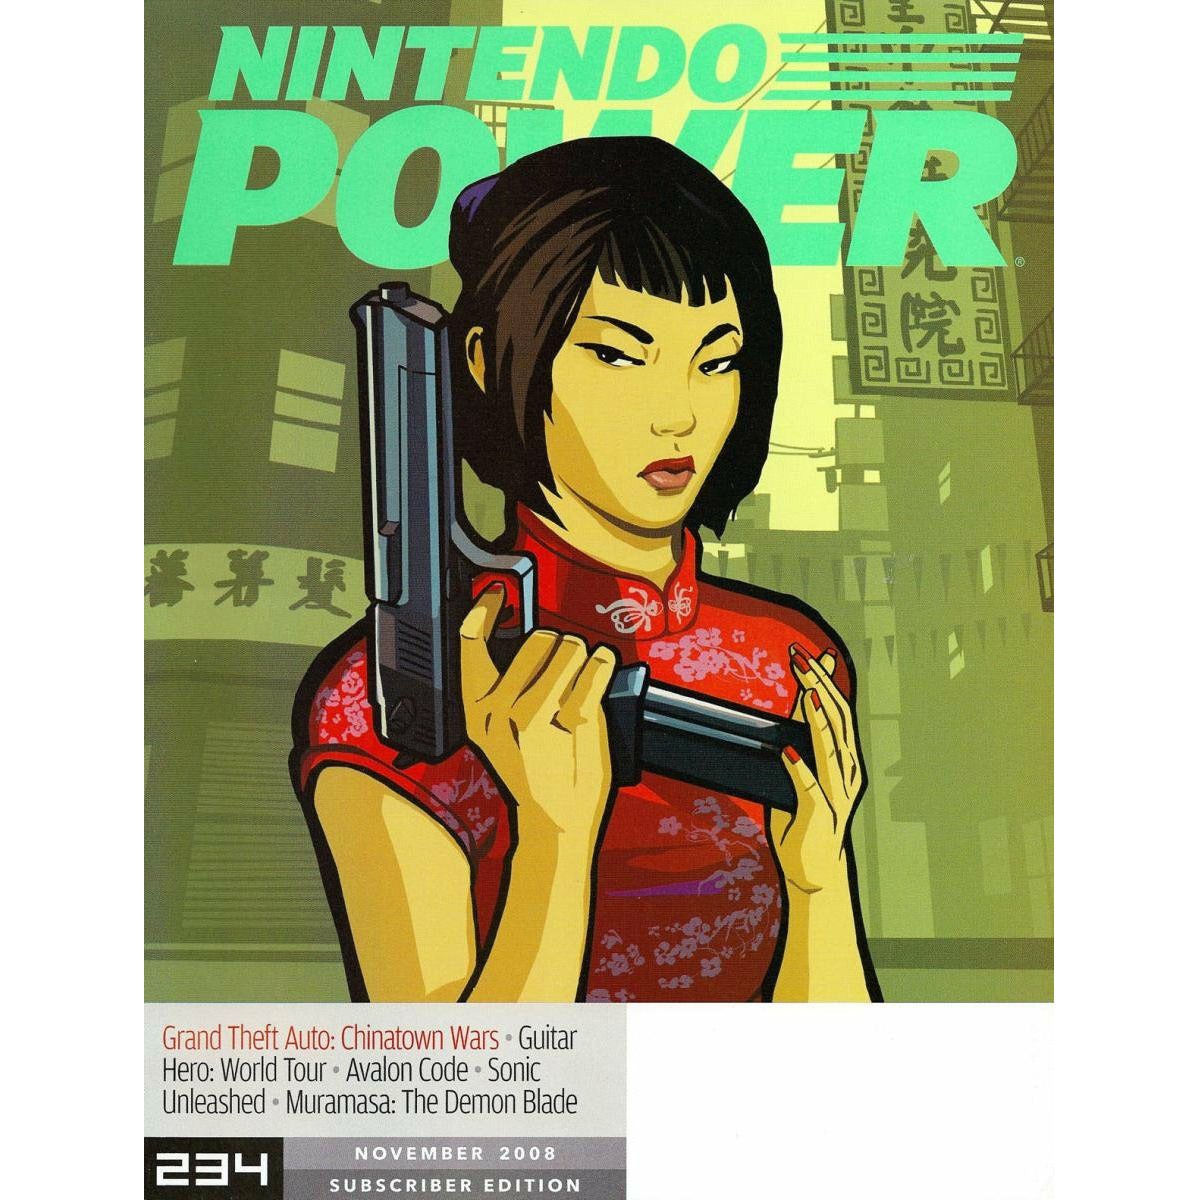 Nintendo Power Magazine (#234 Subscriber Edition) - Complete and/or Good Condition